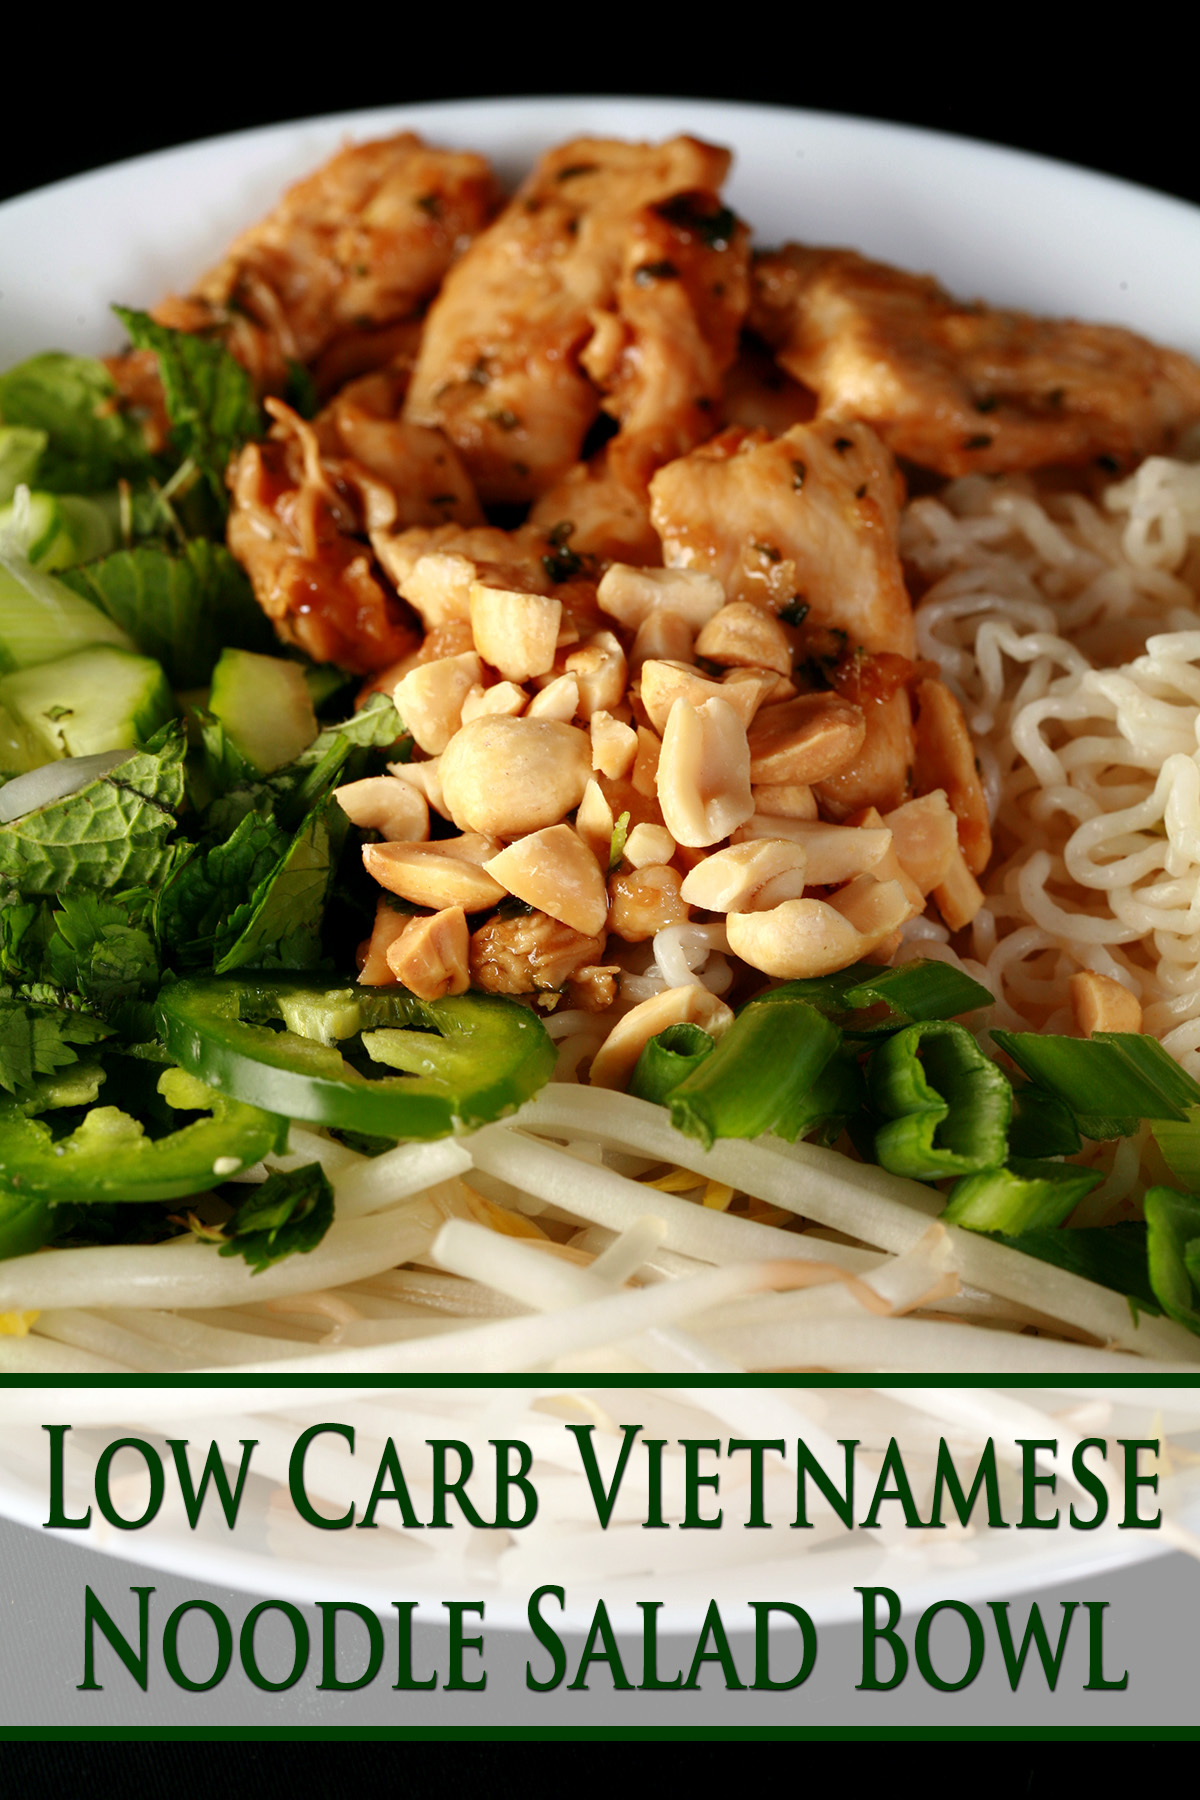 A Low carb Vietnamese noodle salad, as described in the post.